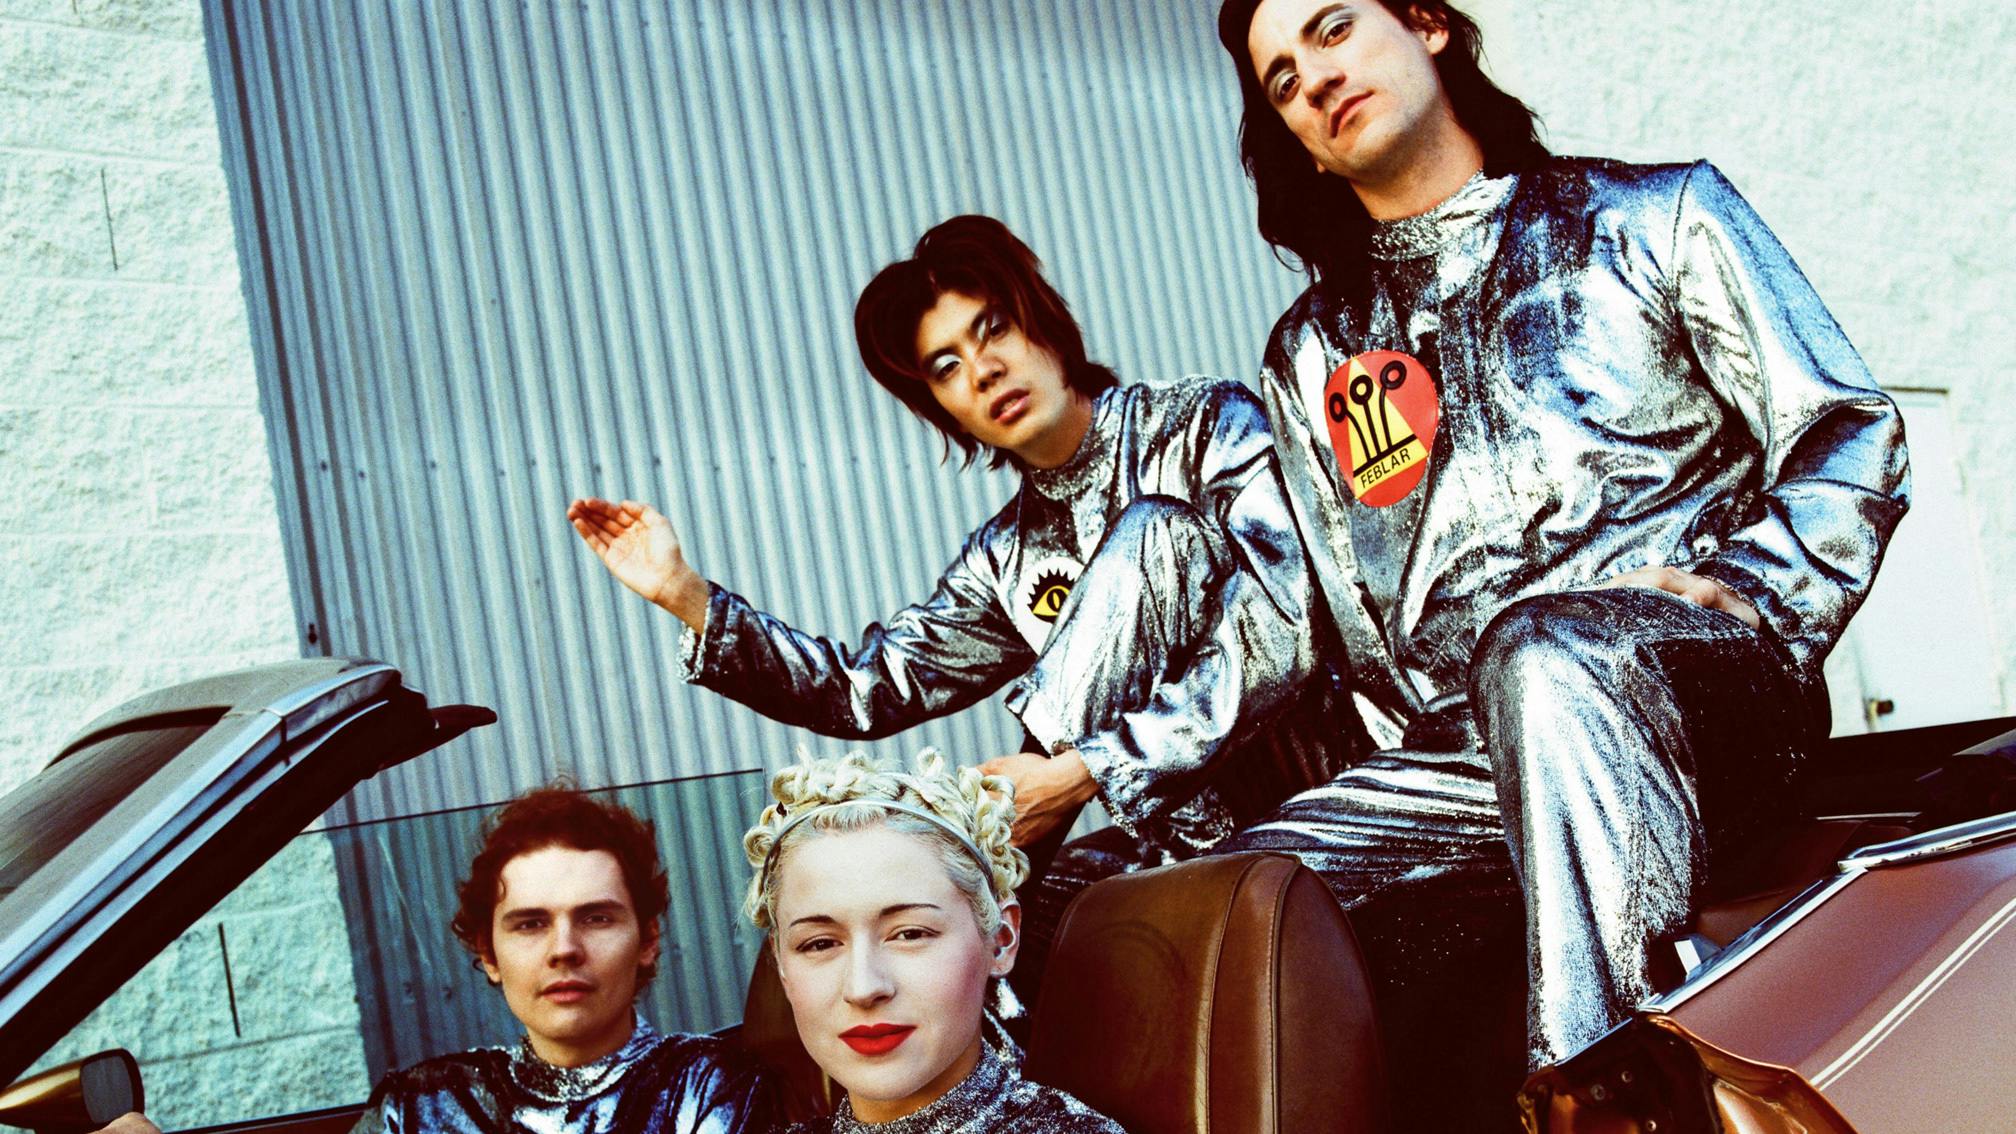 The 20 greatest Smashing Pumpkins songs – ranked